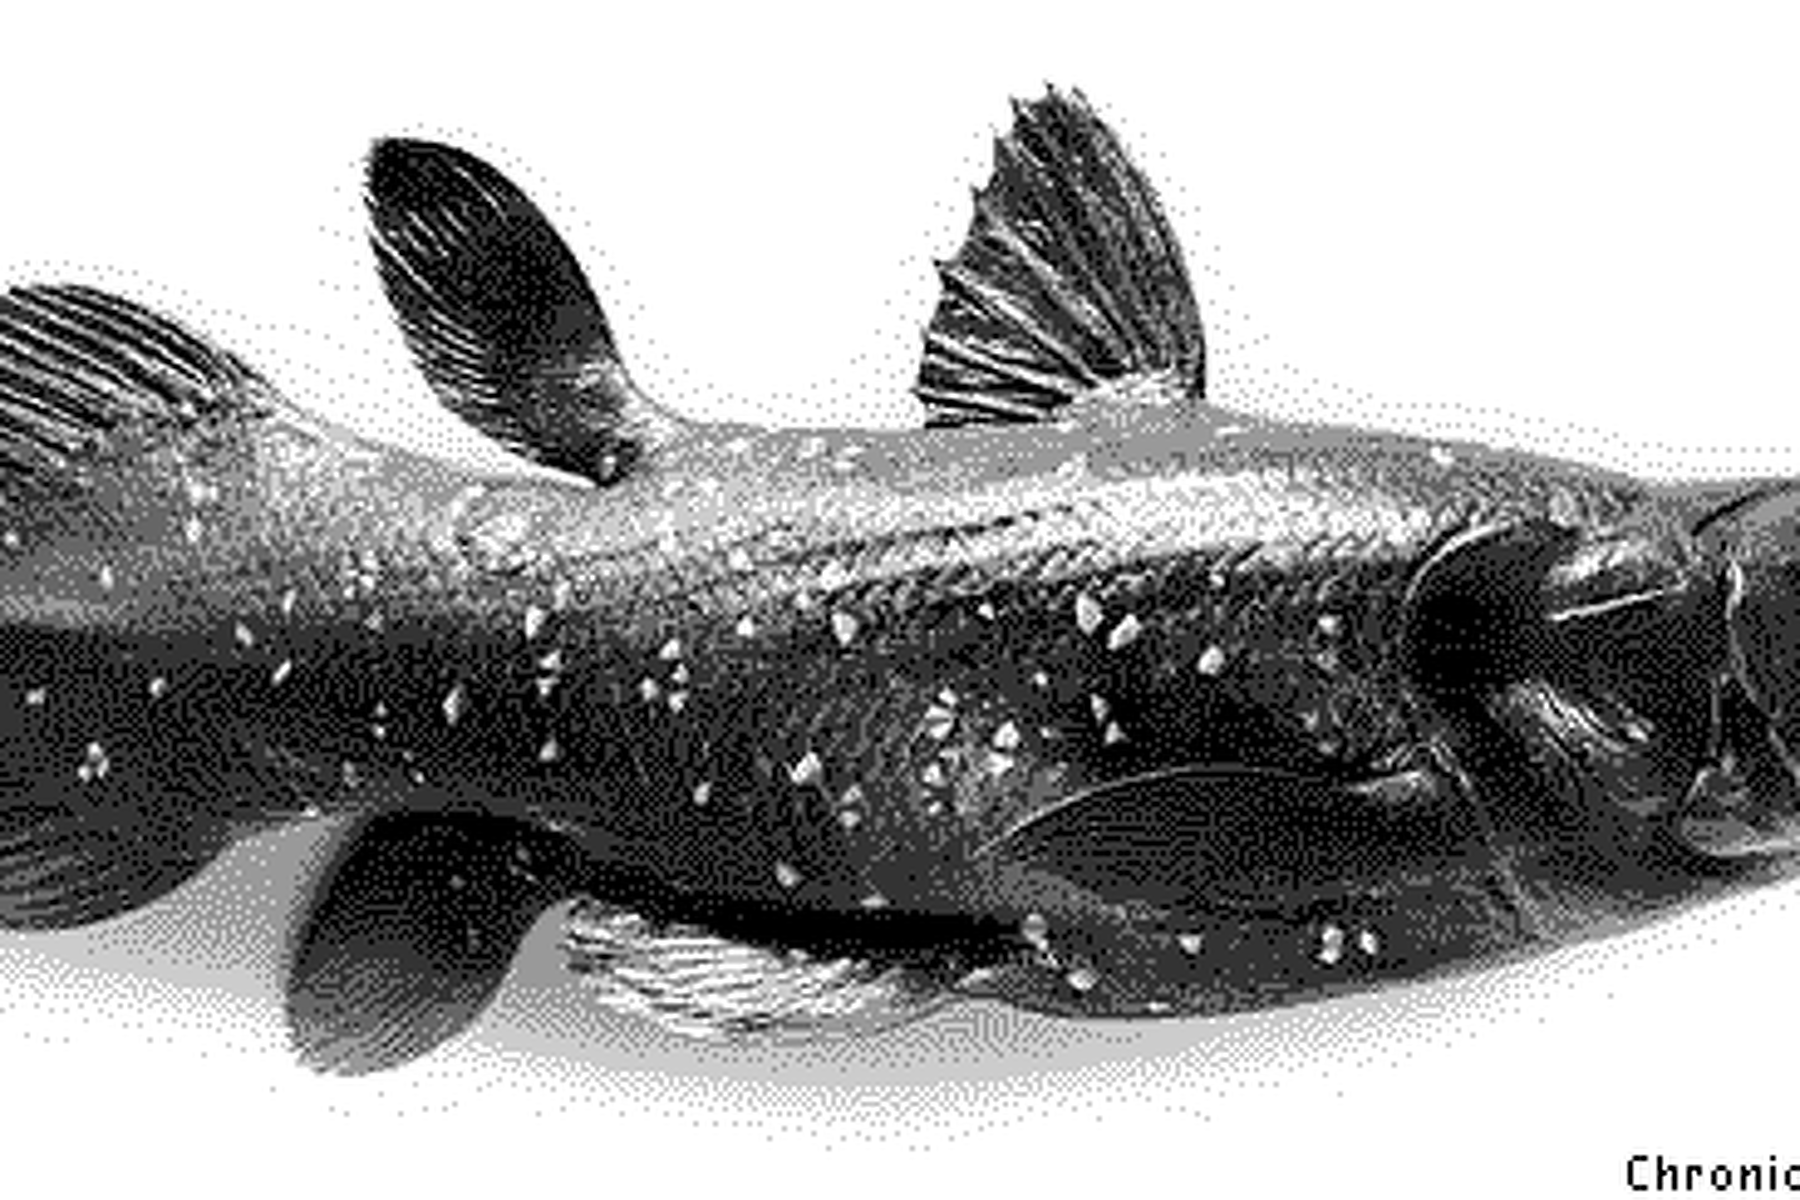 how old is the species of fish known as the coelacanth